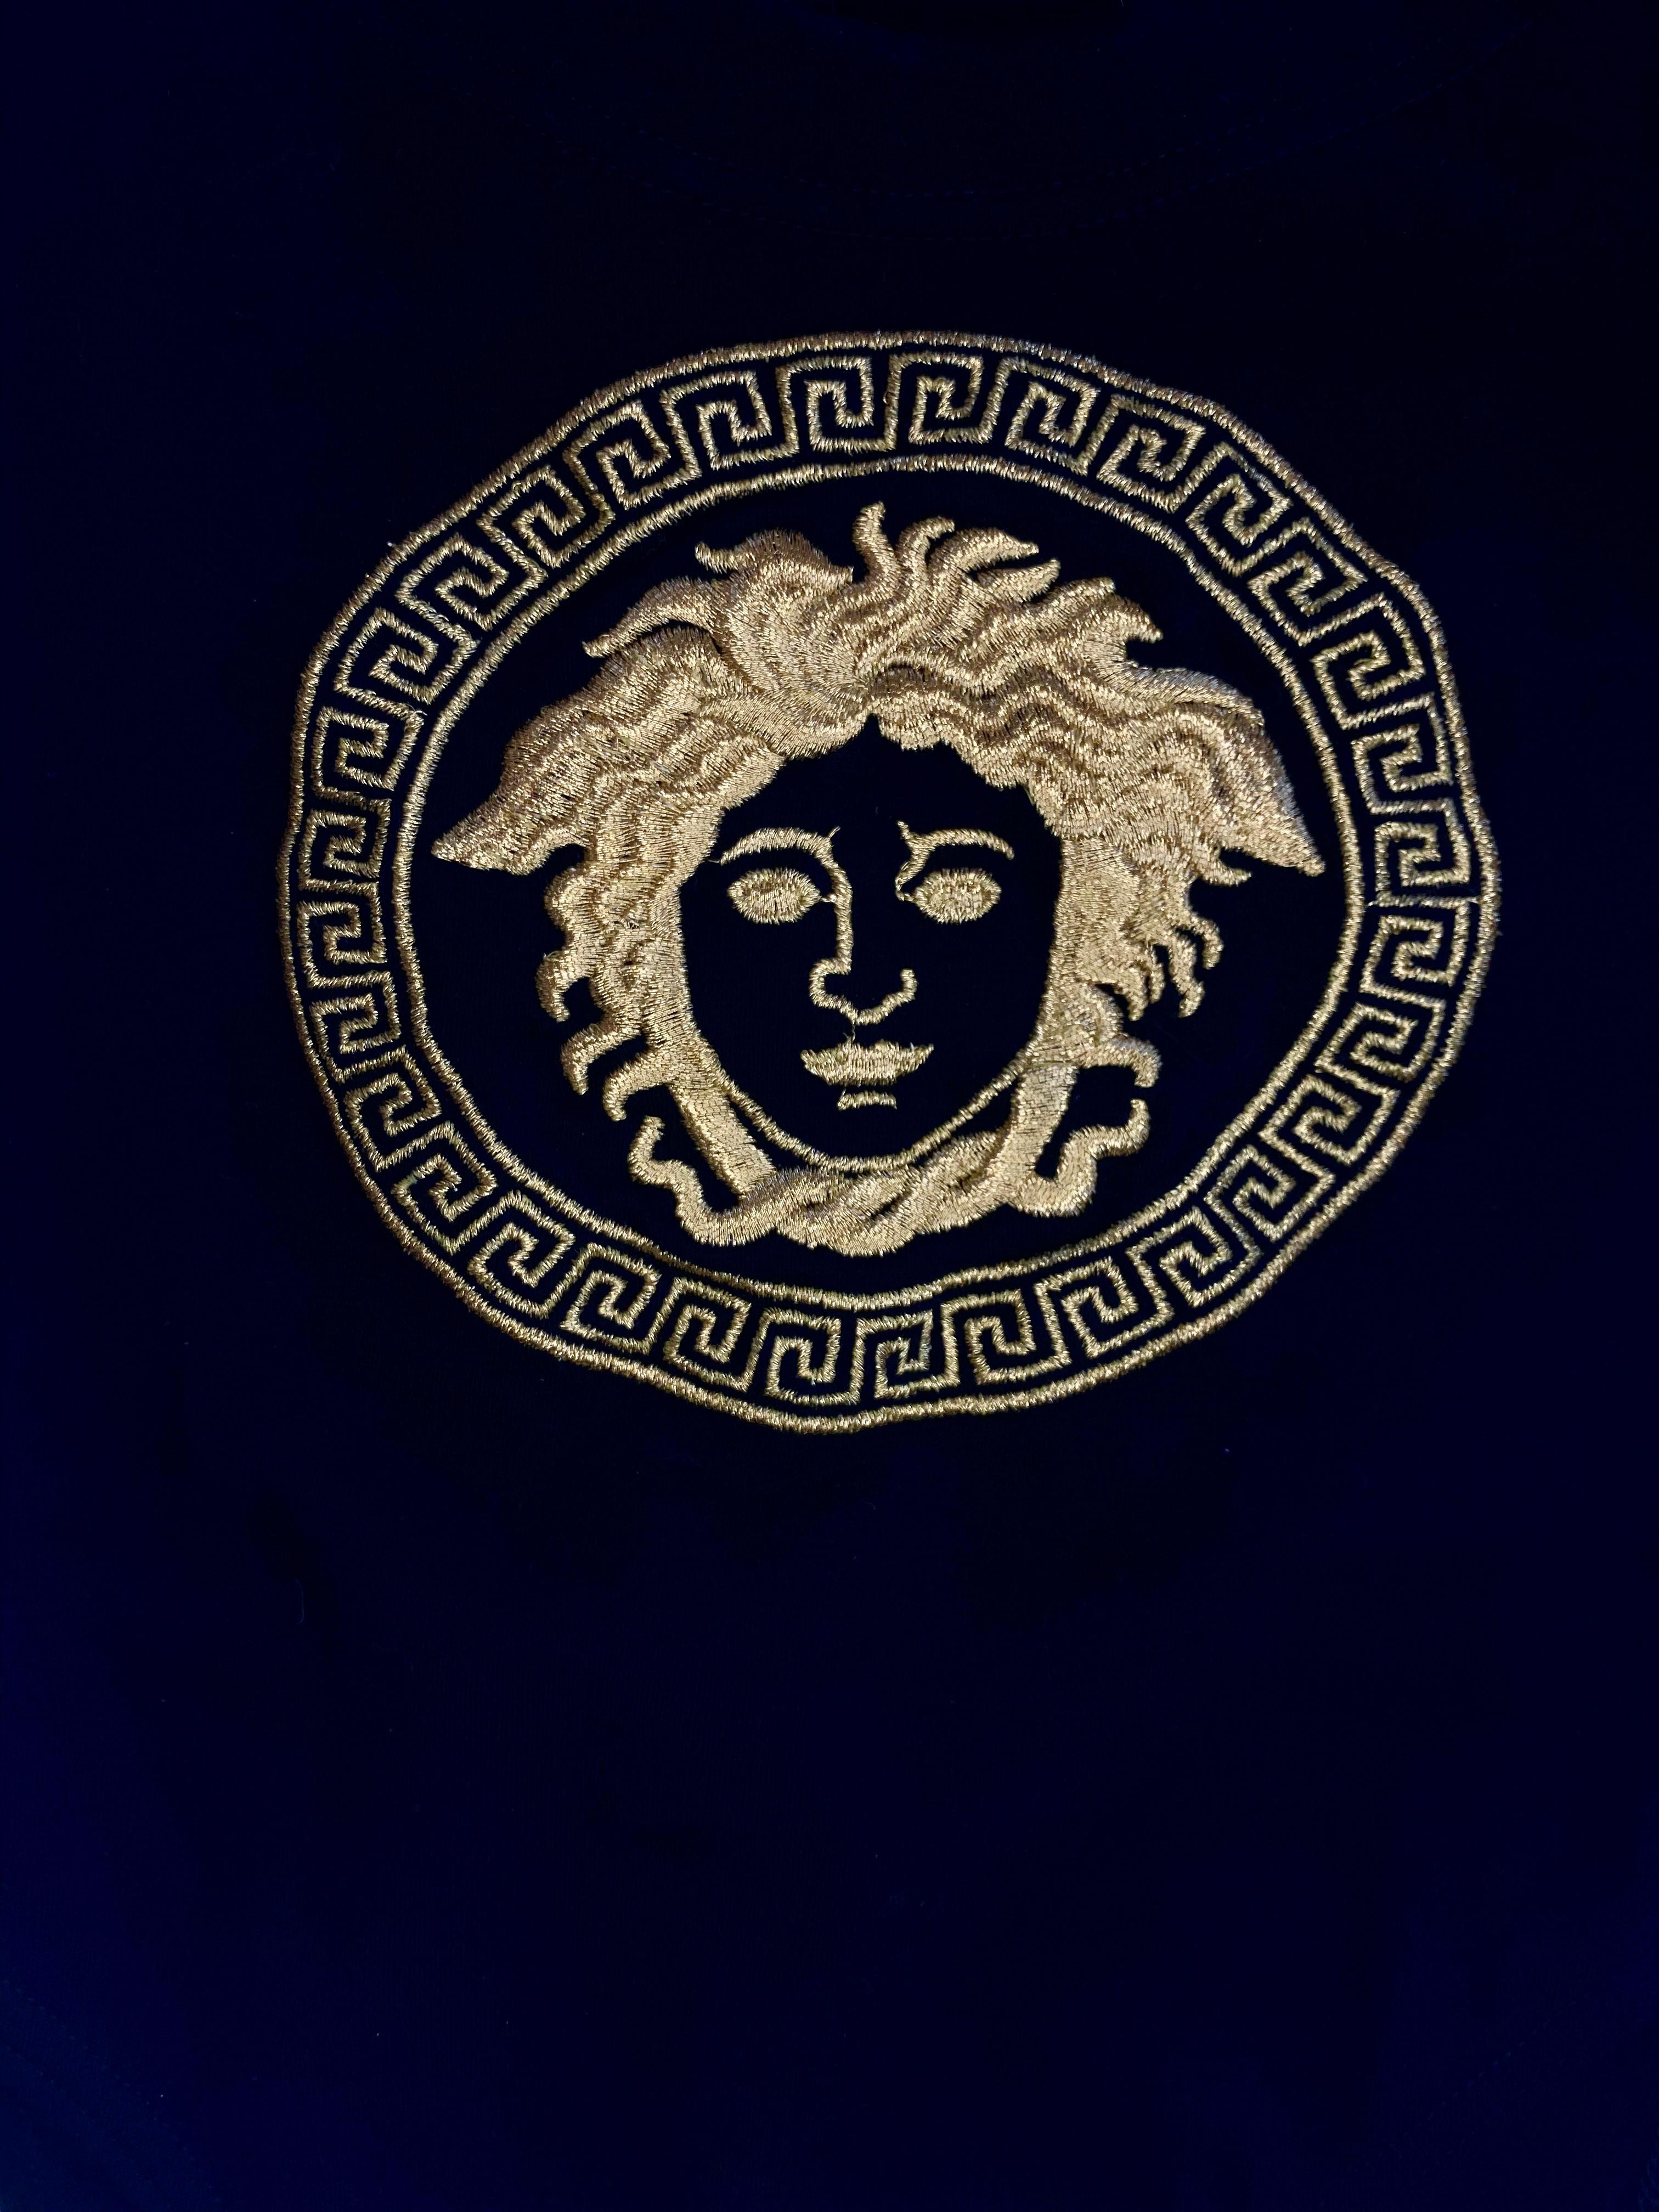 S/S 1993 Gianni Versace Gold Medusa Logo Embroidered Black Bodysuit In Good Condition For Sale In West Hollywood, CA